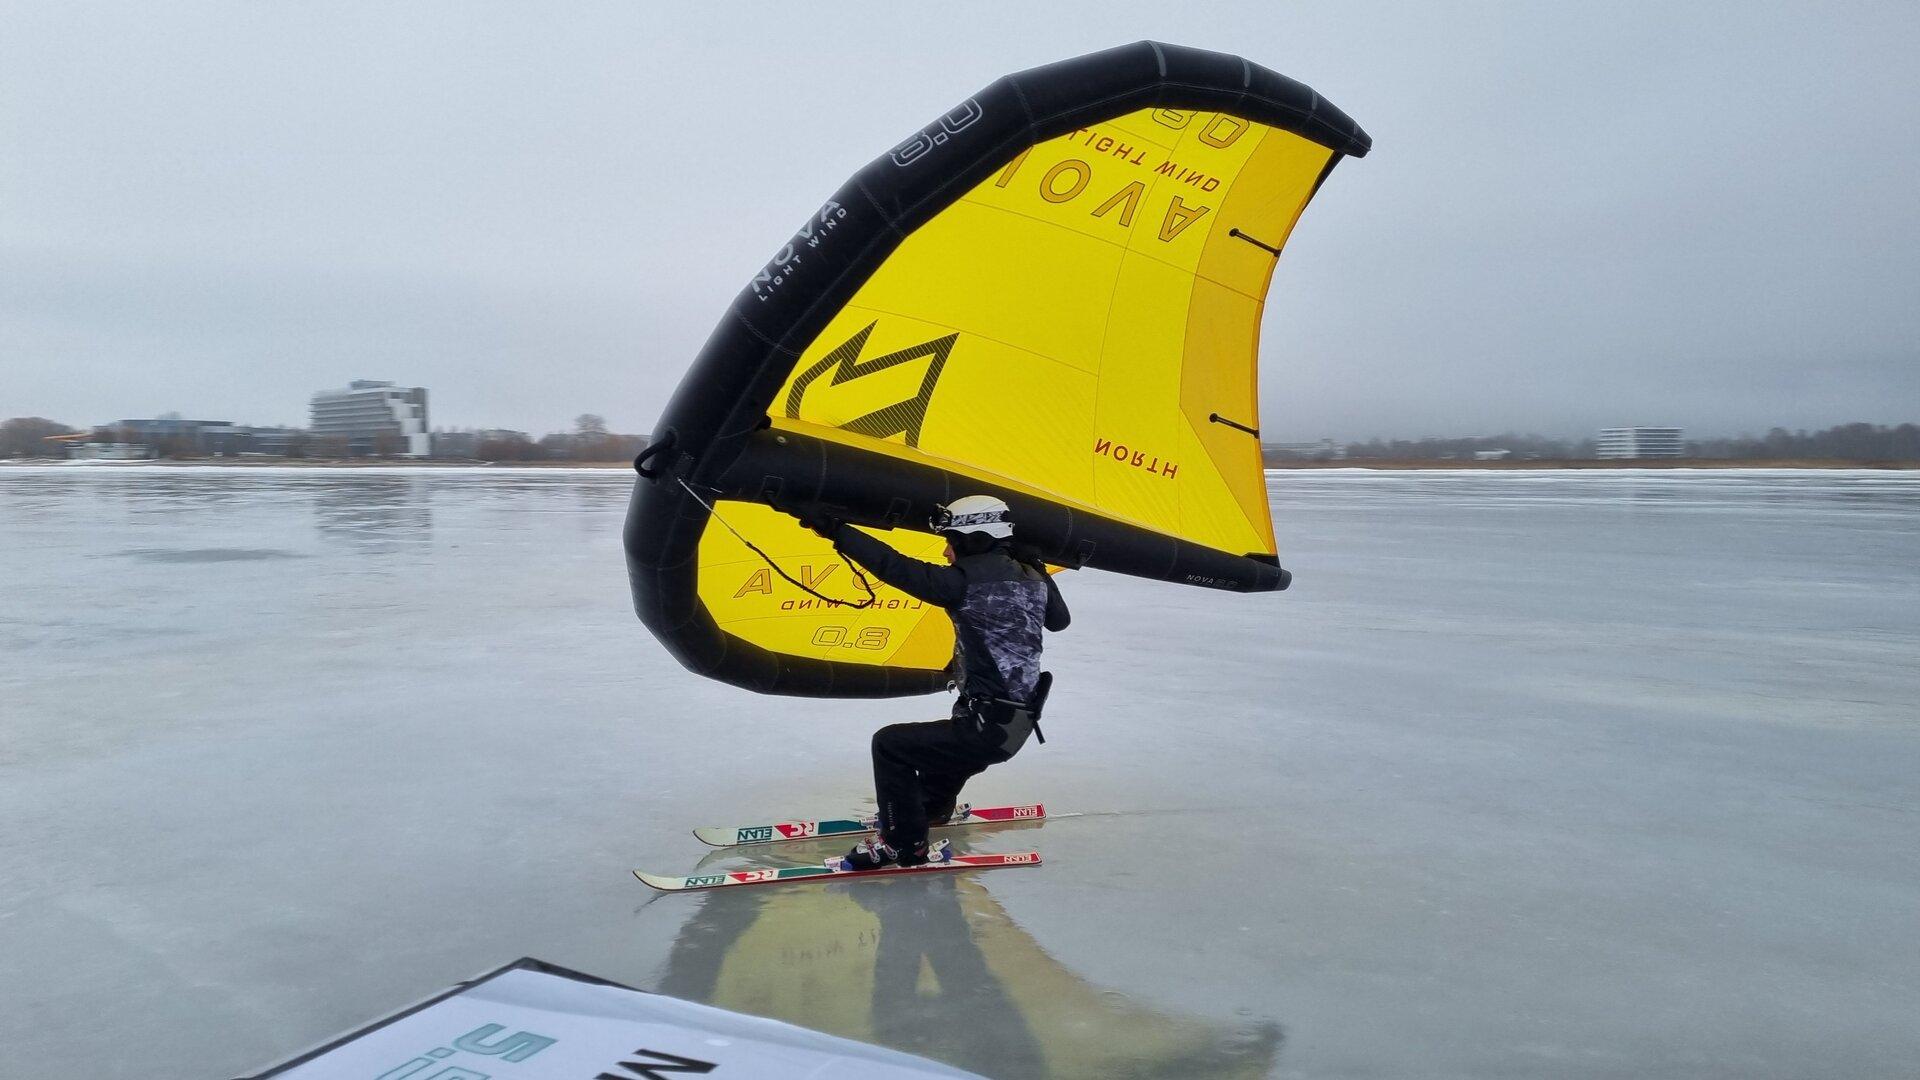 Skis are also used in wingsurf